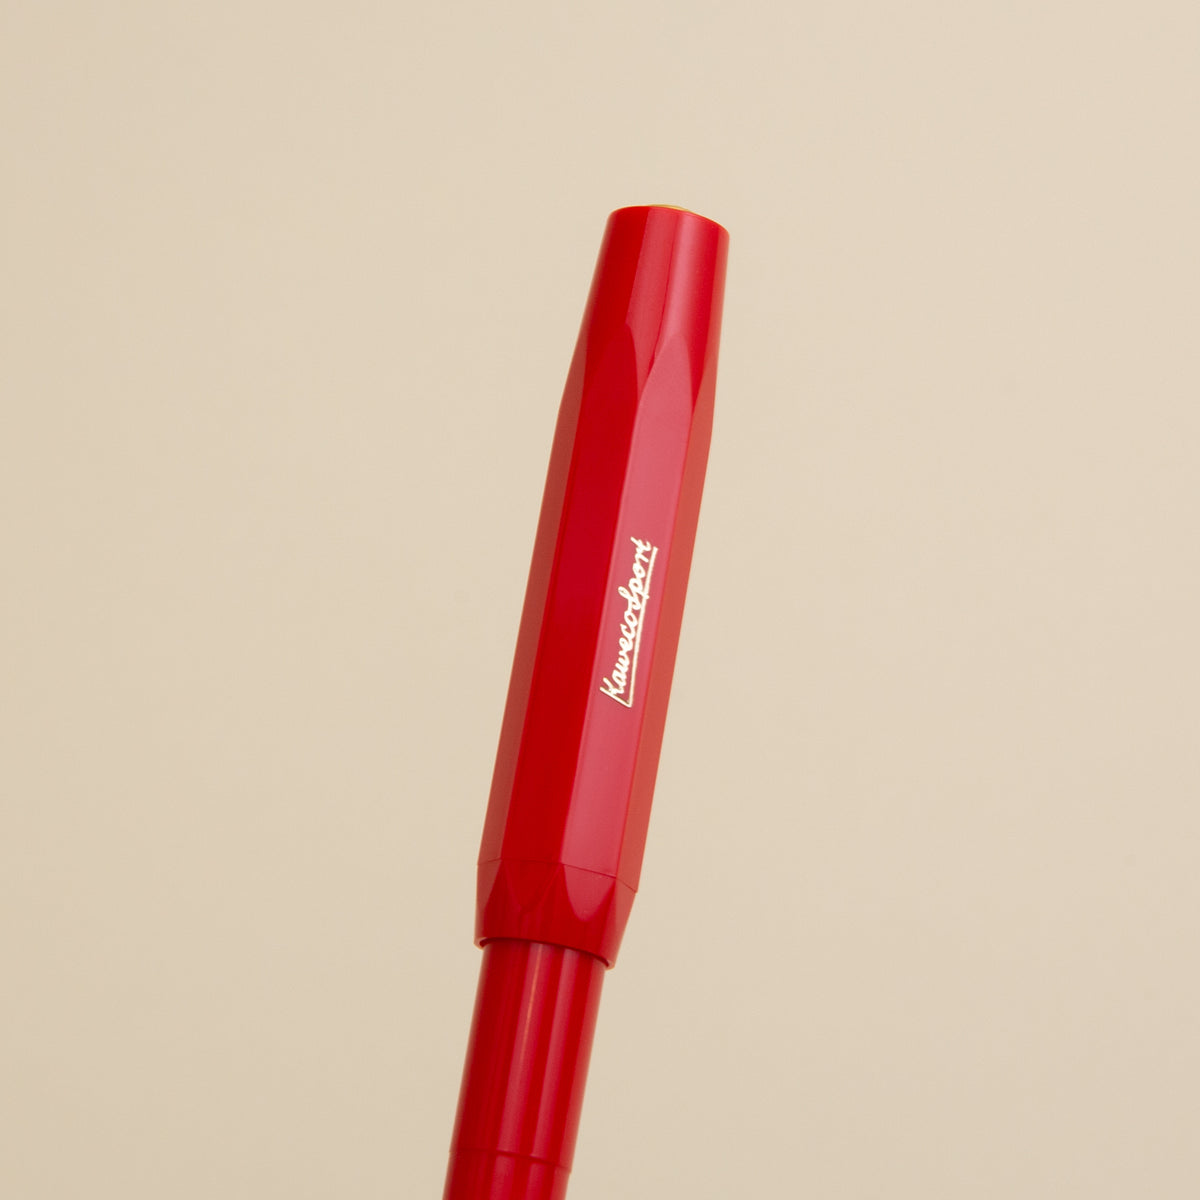 Kaweco Sport Fountain Pen - Red – The Good Liver